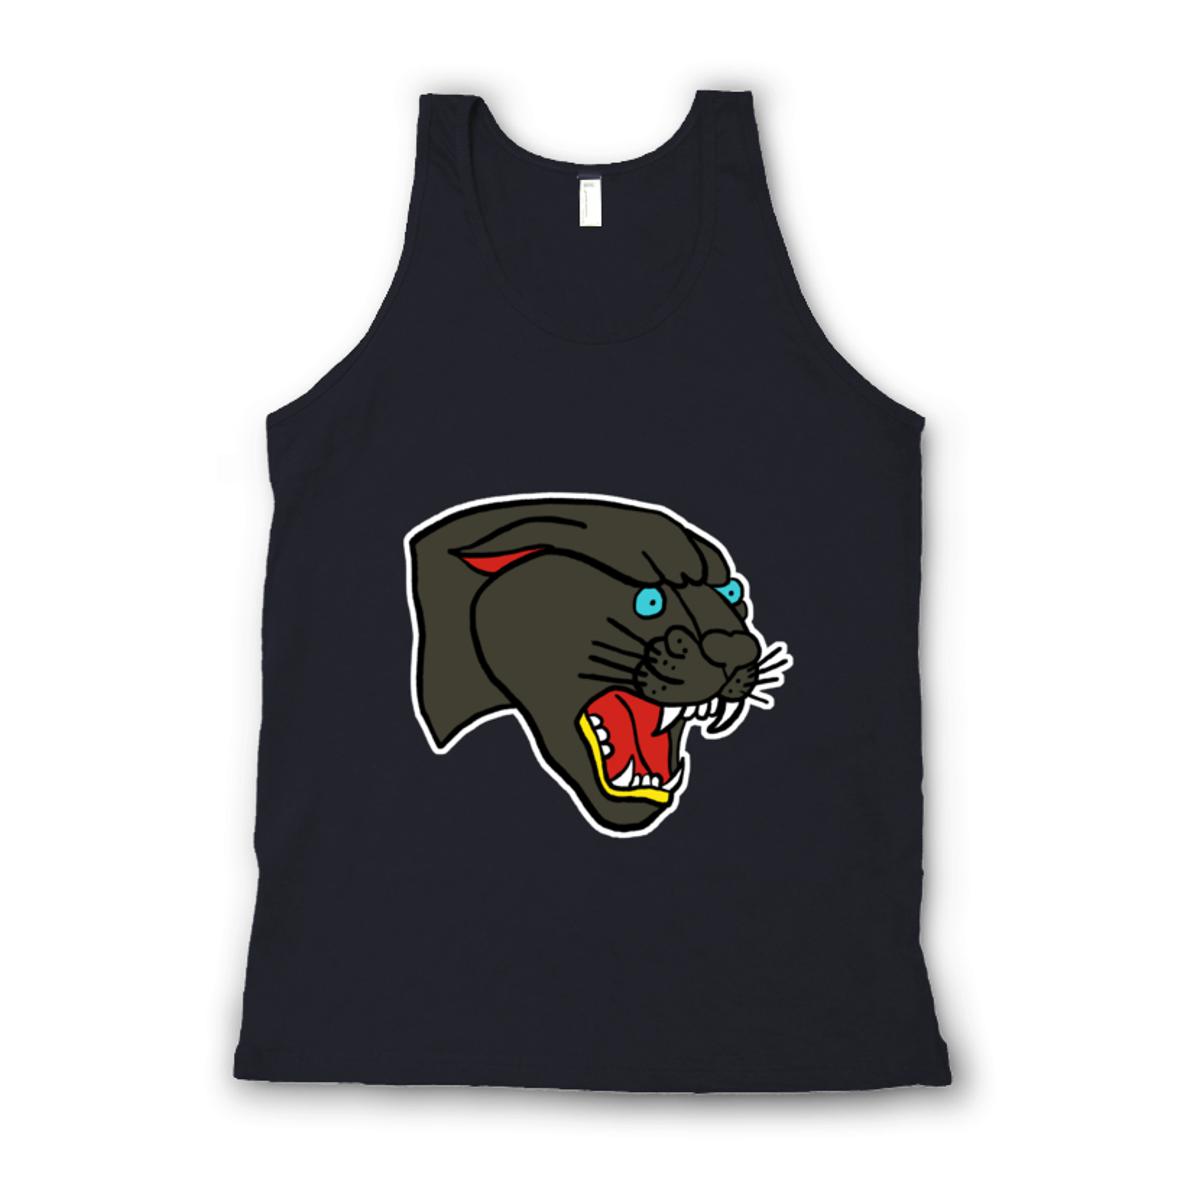 American Traditional Panther Unisex Tank Top Large black